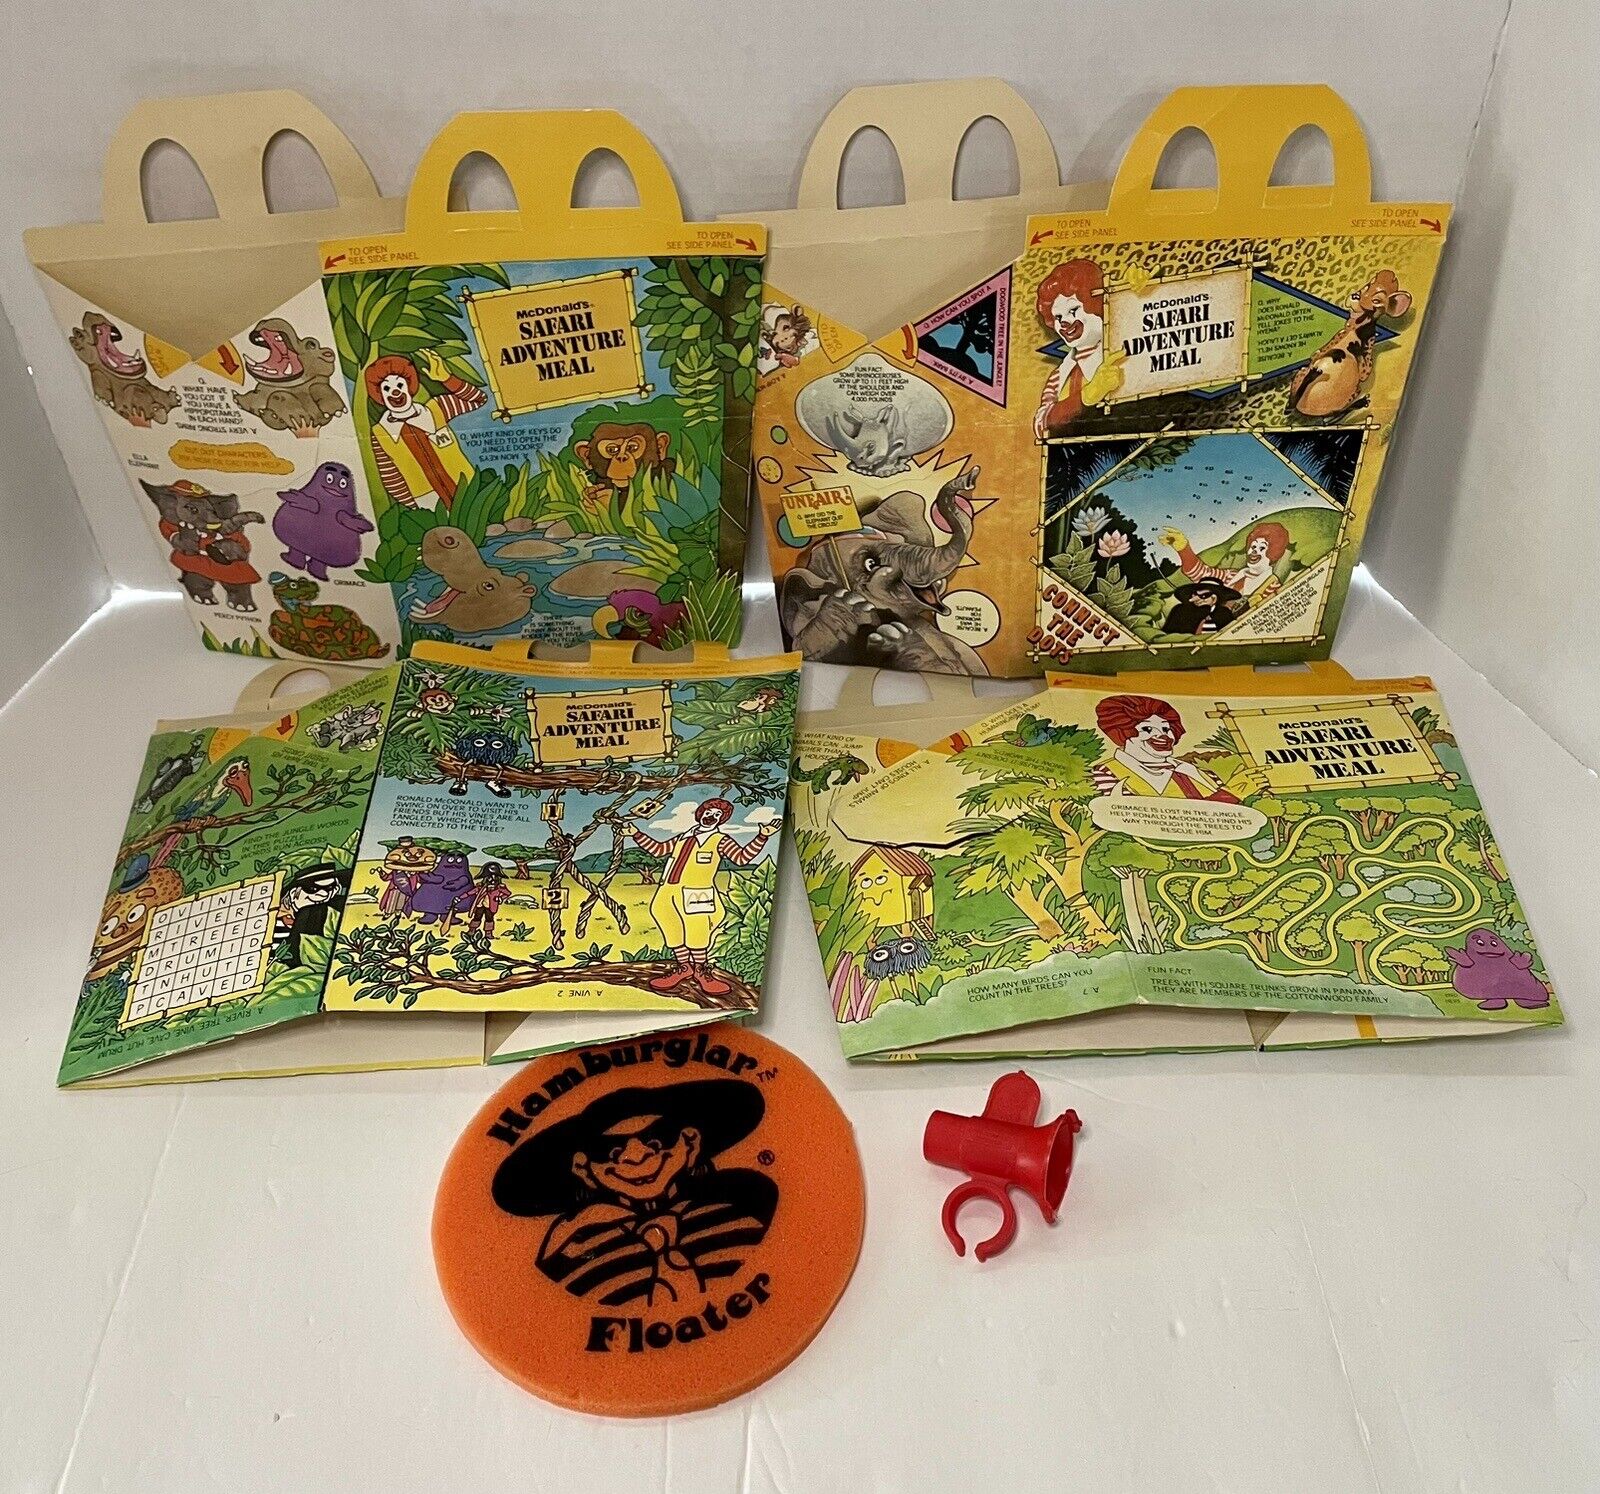 1980 McDonald\'s Happy Meal Boxes 4, Safari Adventure Meal, Ronald Whistle Ring